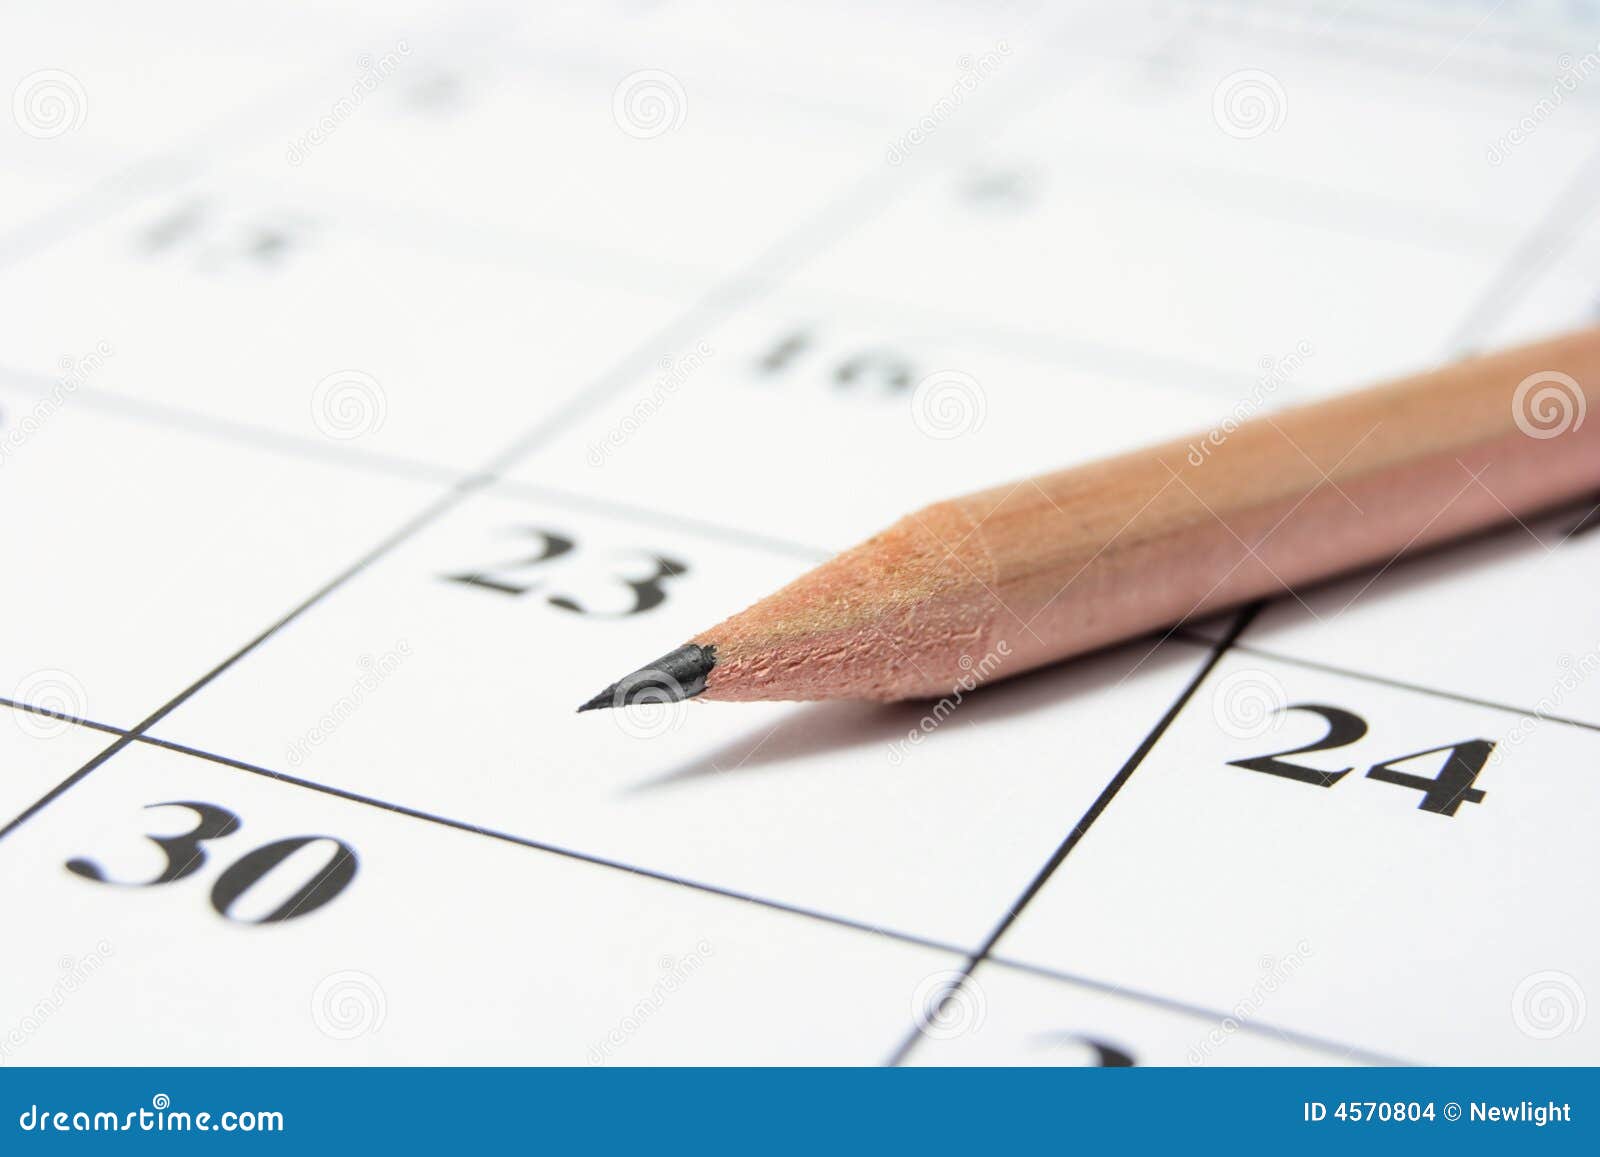 Pencil On Calendar Stock Images Image 4570804